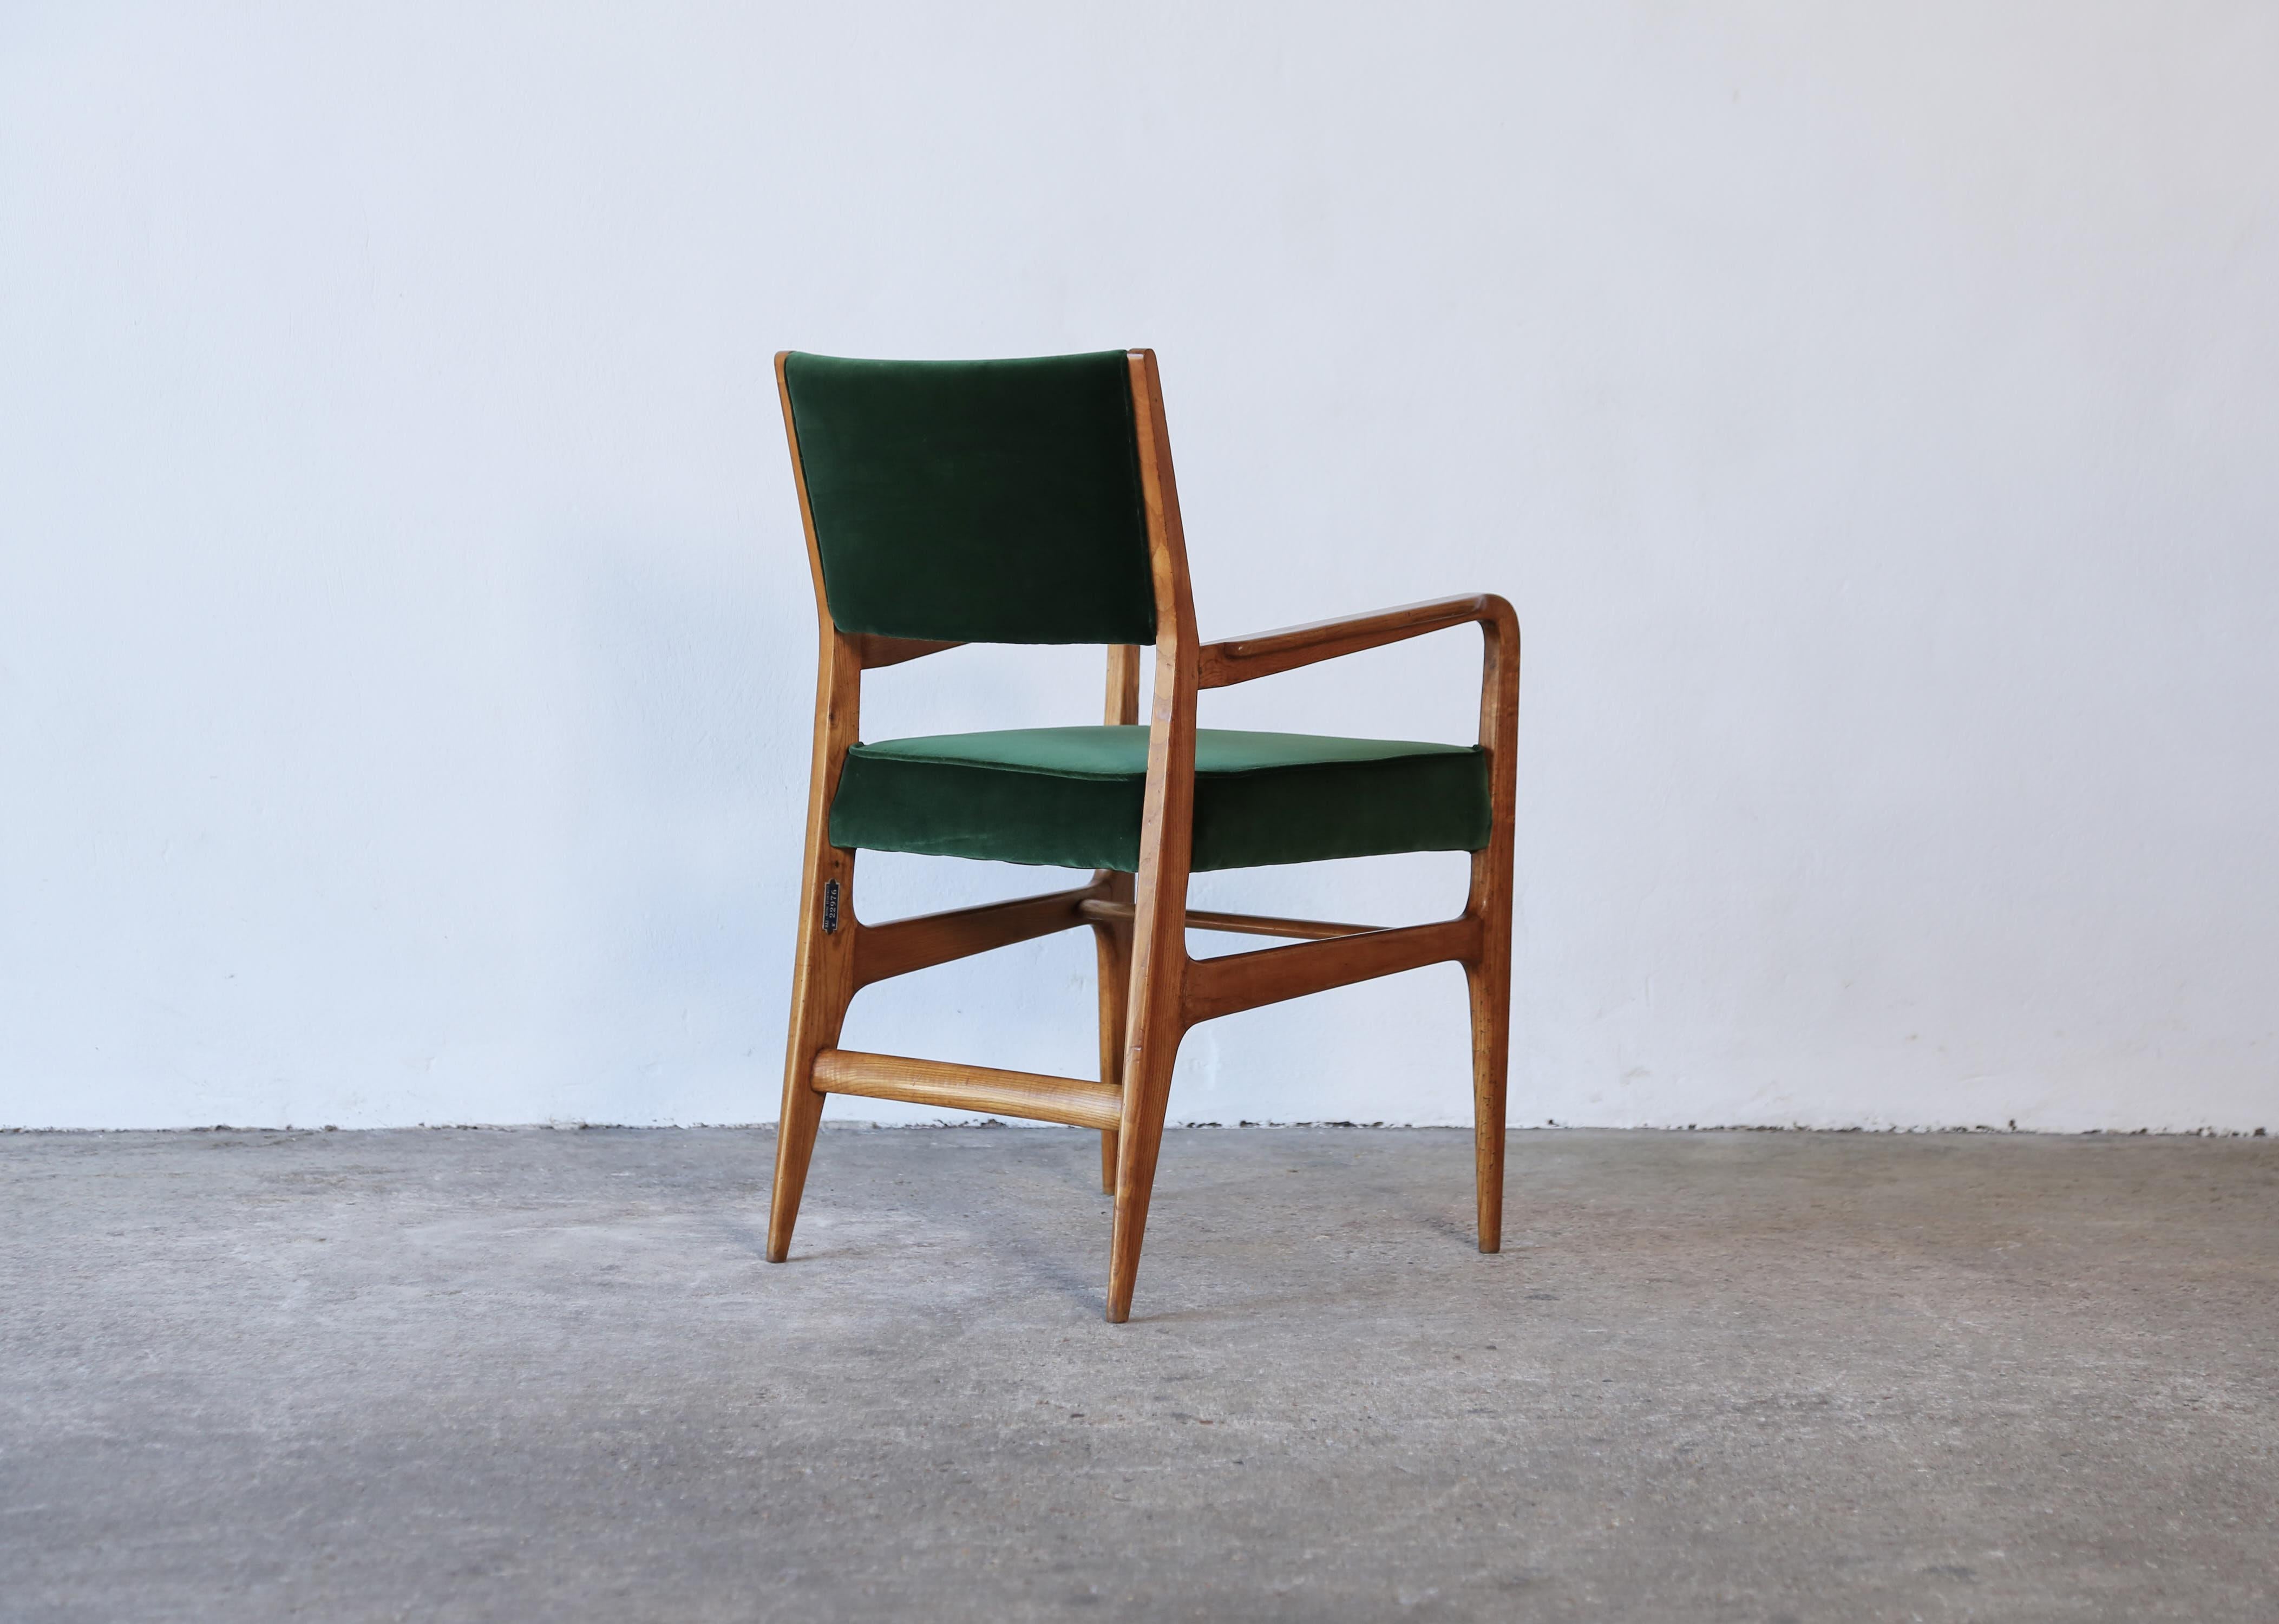 Rare Early Gio Ponti Chair, Giordano Chiesa, Italy, 1950s For Sale 4